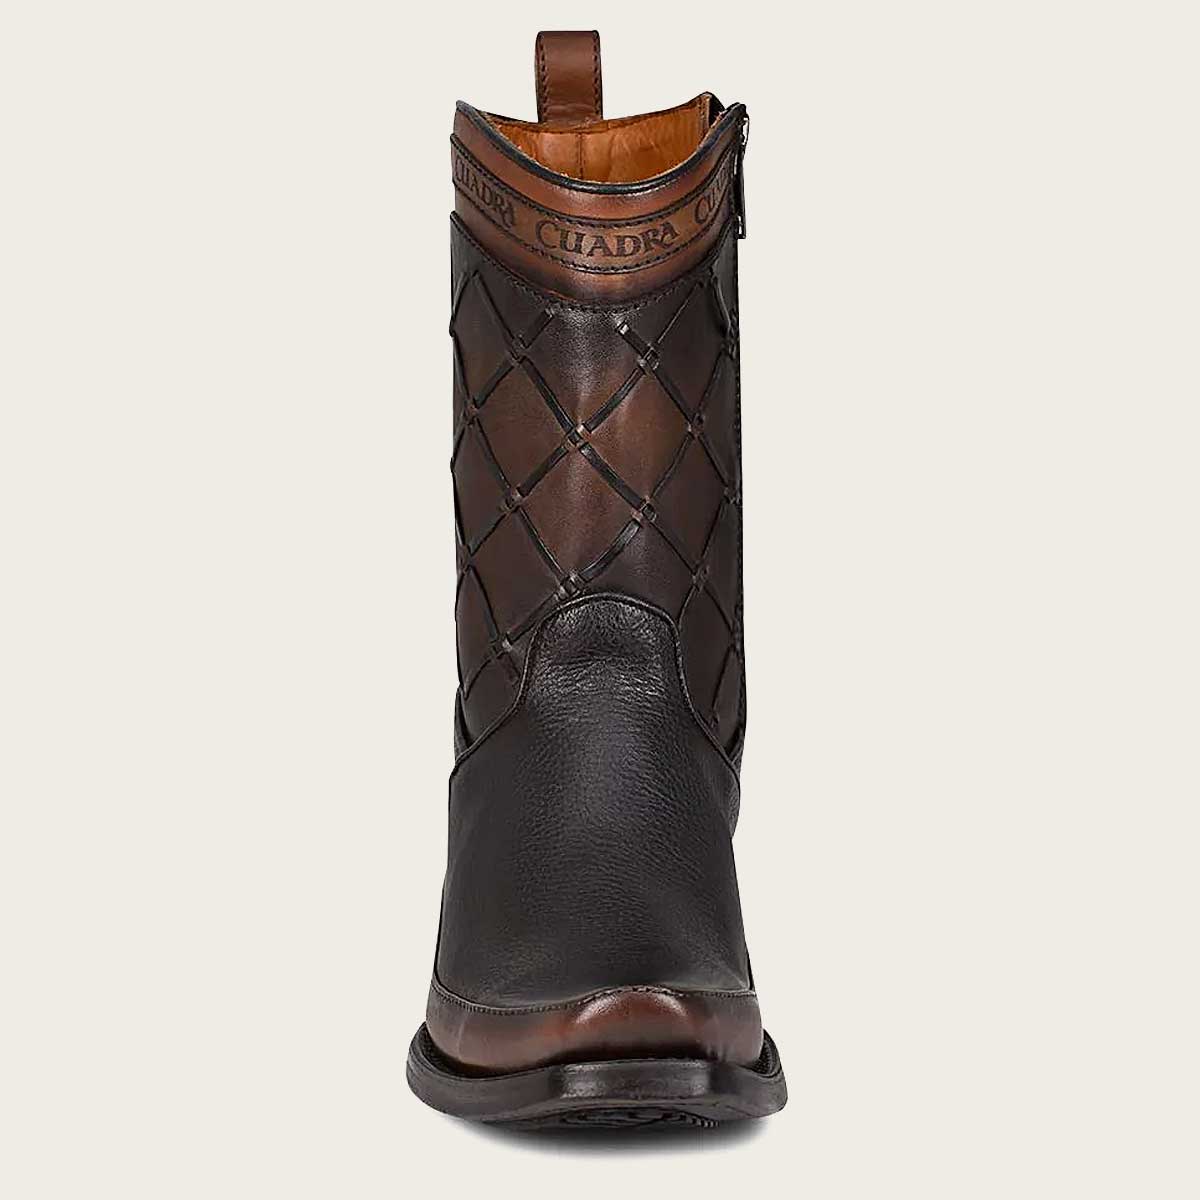 Black hand-painted engraved leather boots - 1J2IRS - Cuadra Shop